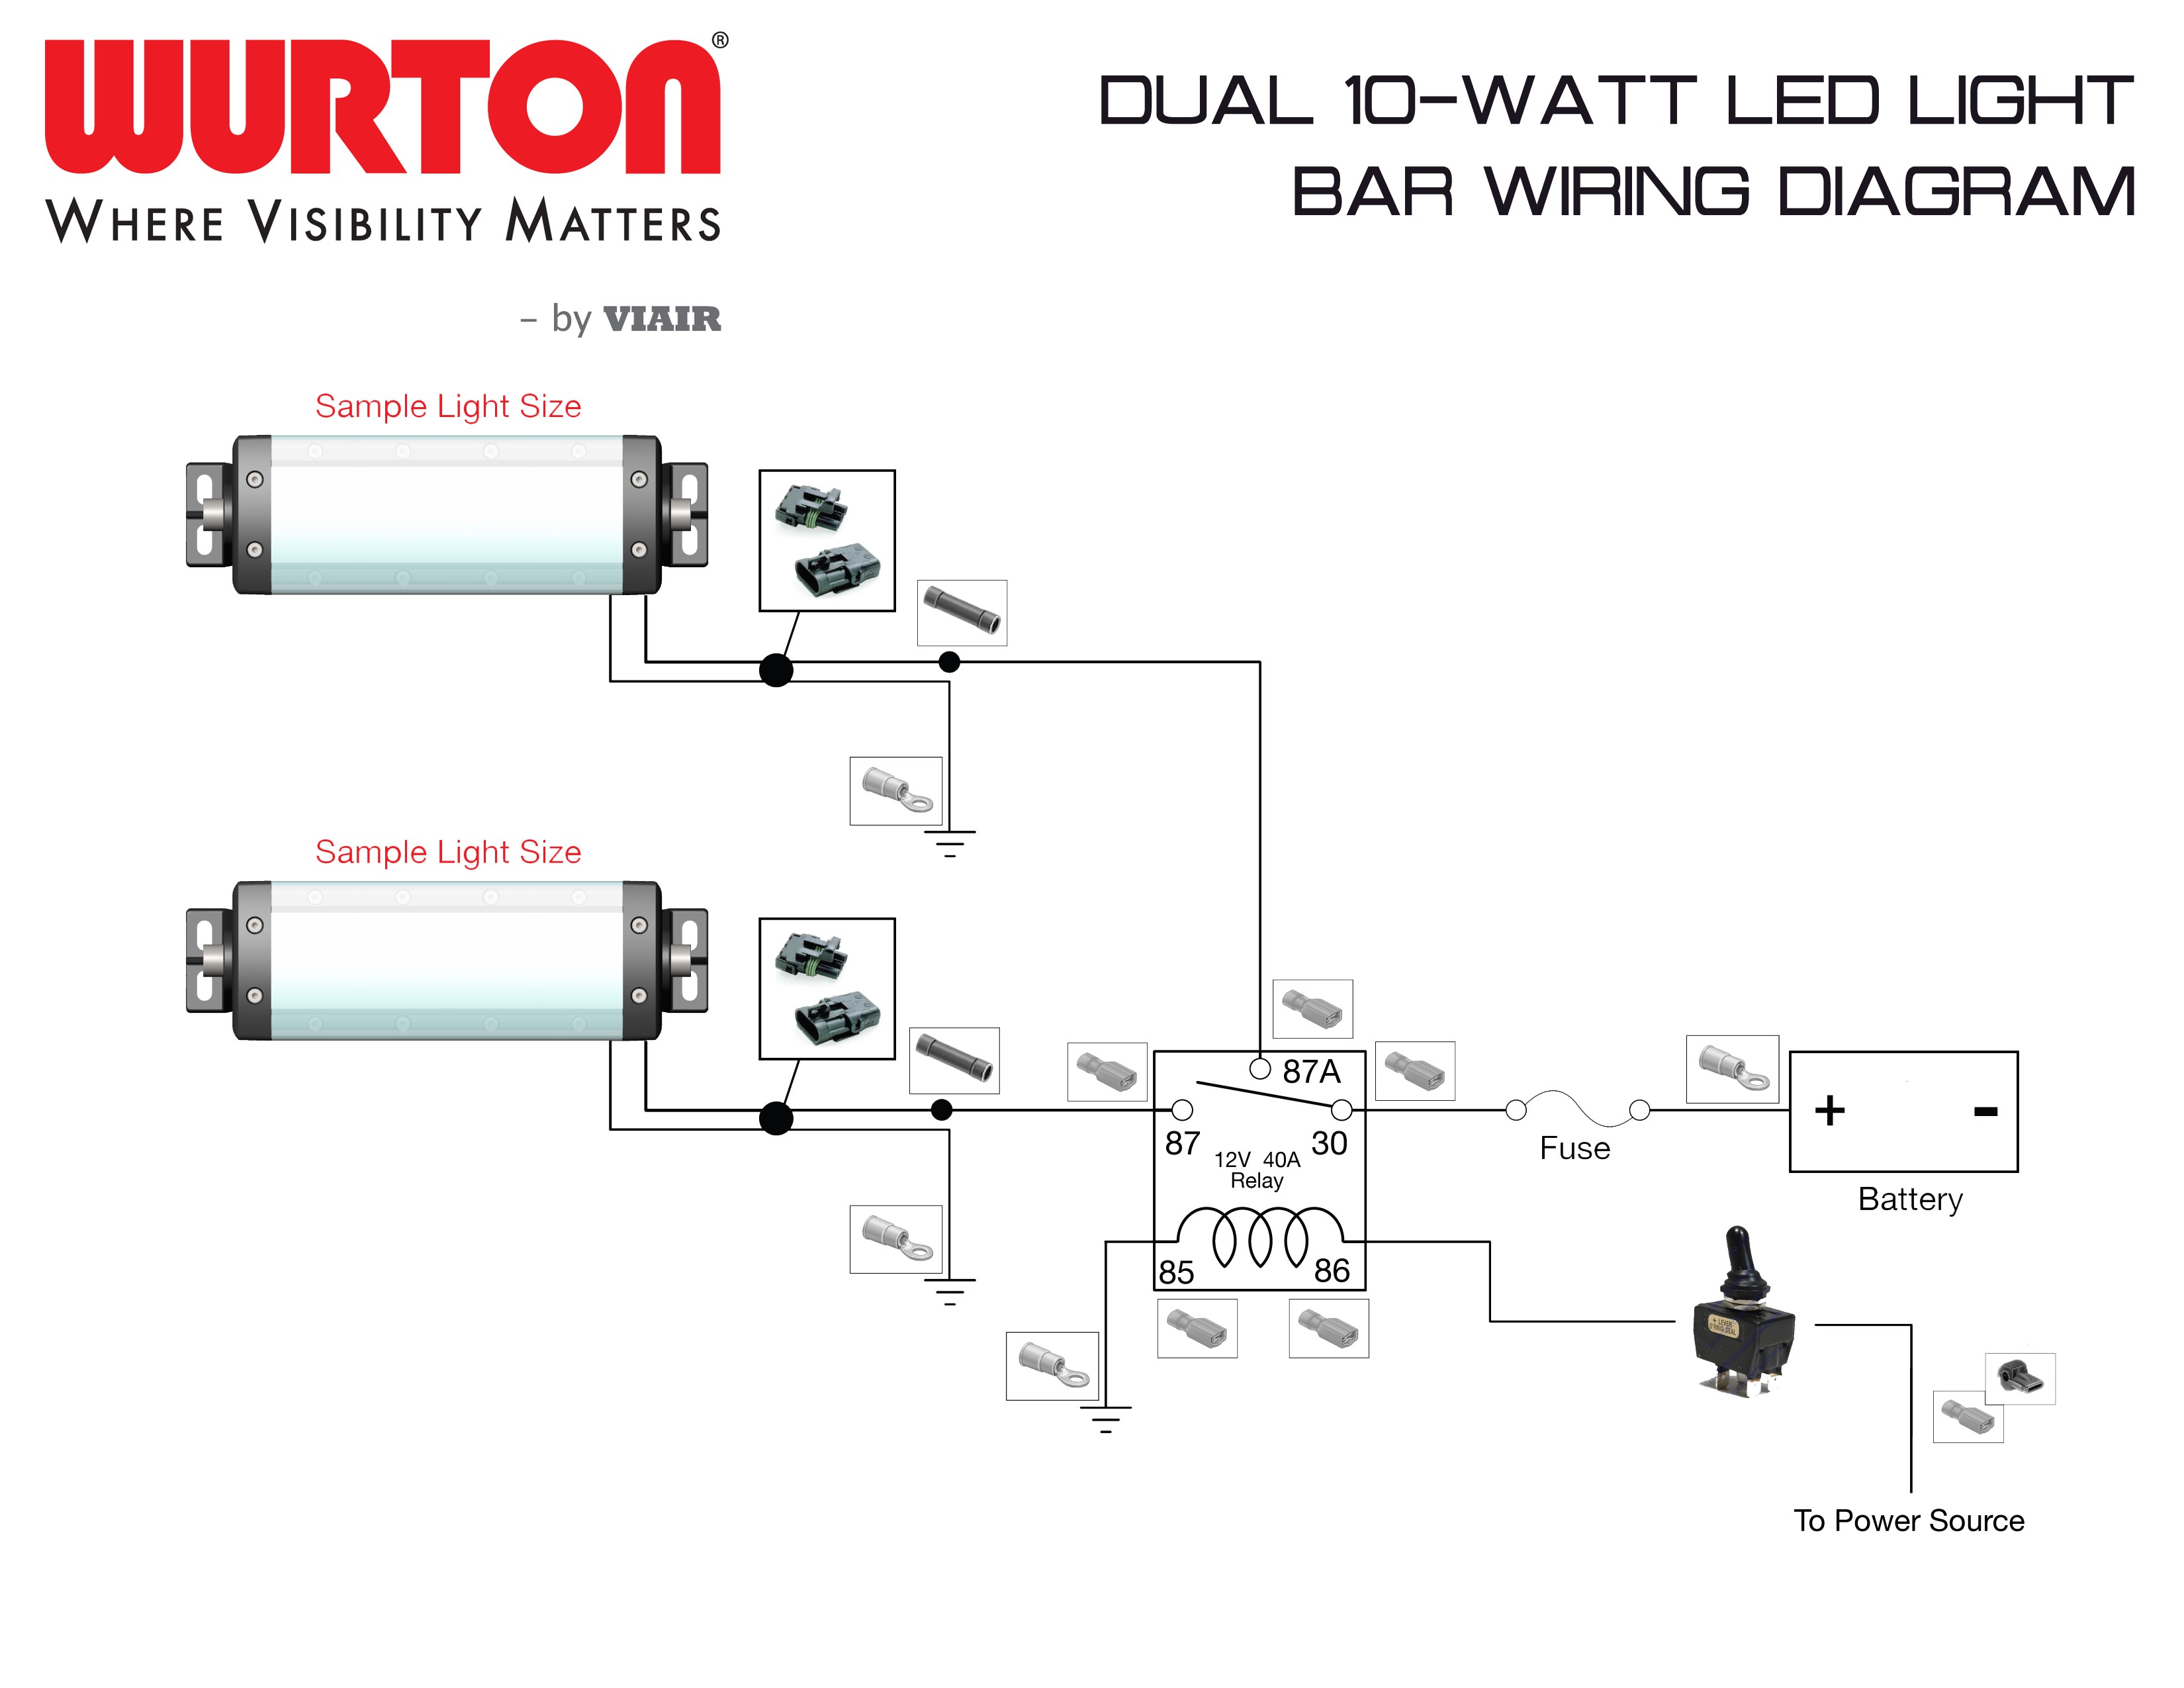 Wiring Diagrams Wurton froad Led Lighting At Light Bar Wire Diagram With Harness